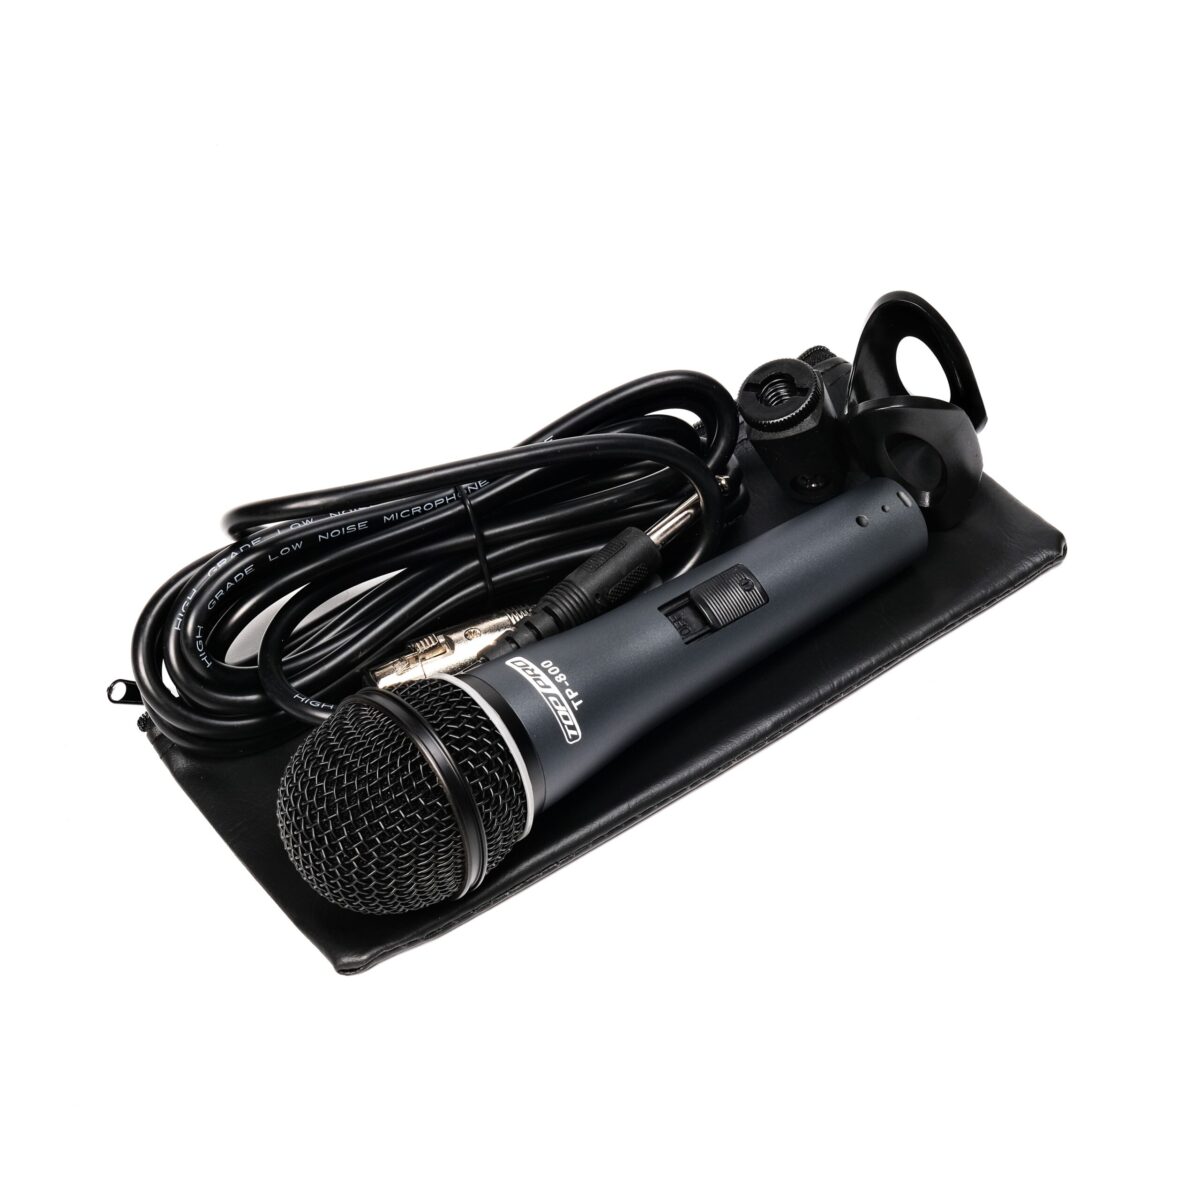 TOP PRO TP-800 HANDHELD DYNAMIC MICROPHONE